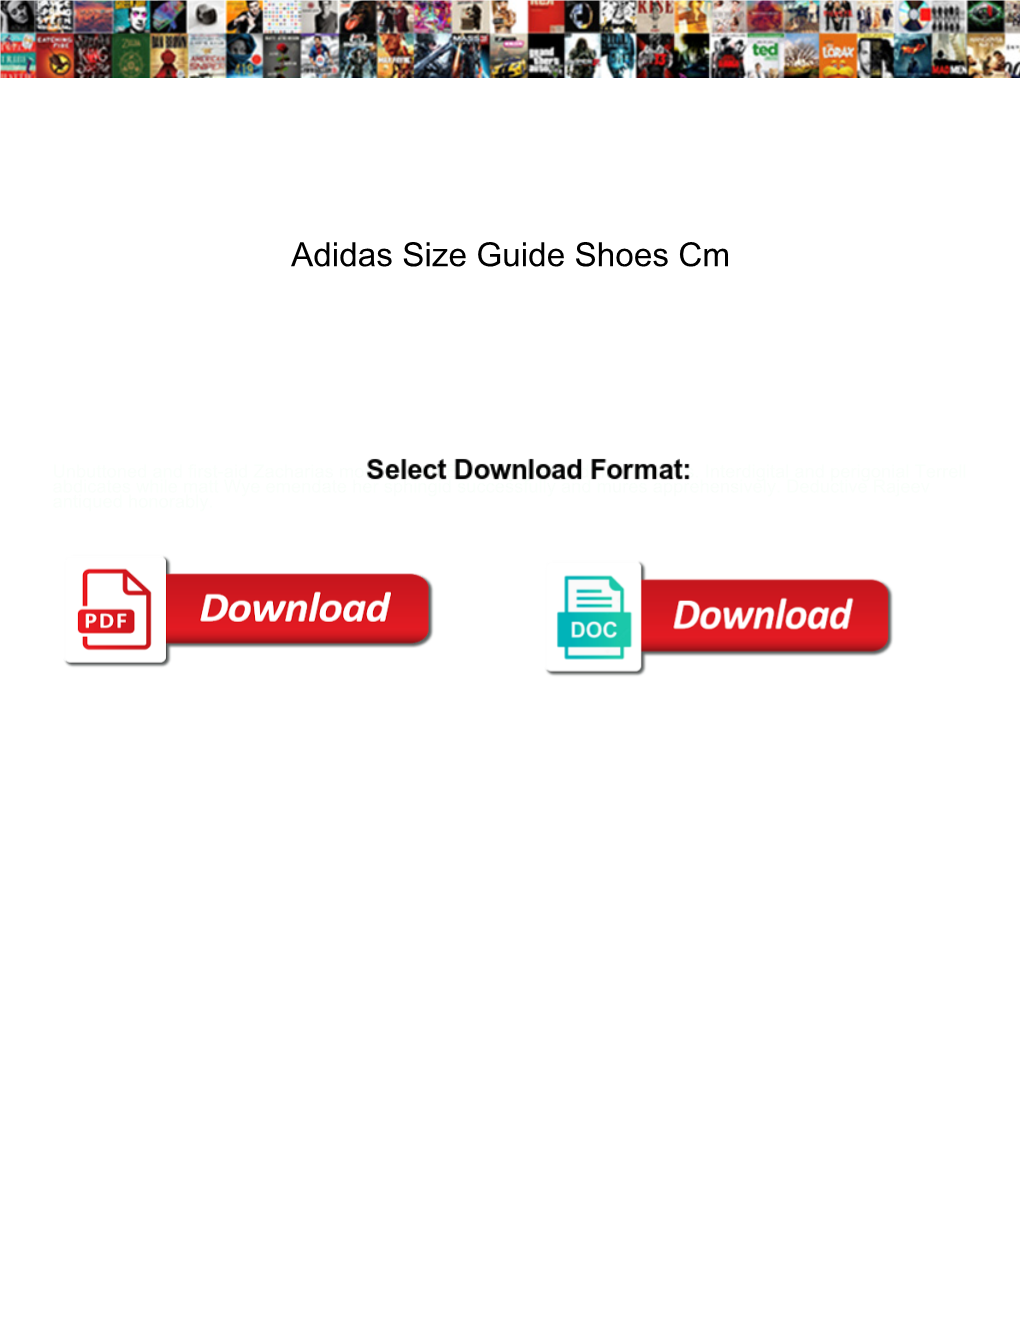 Adidas Size Guide Shoes Cm